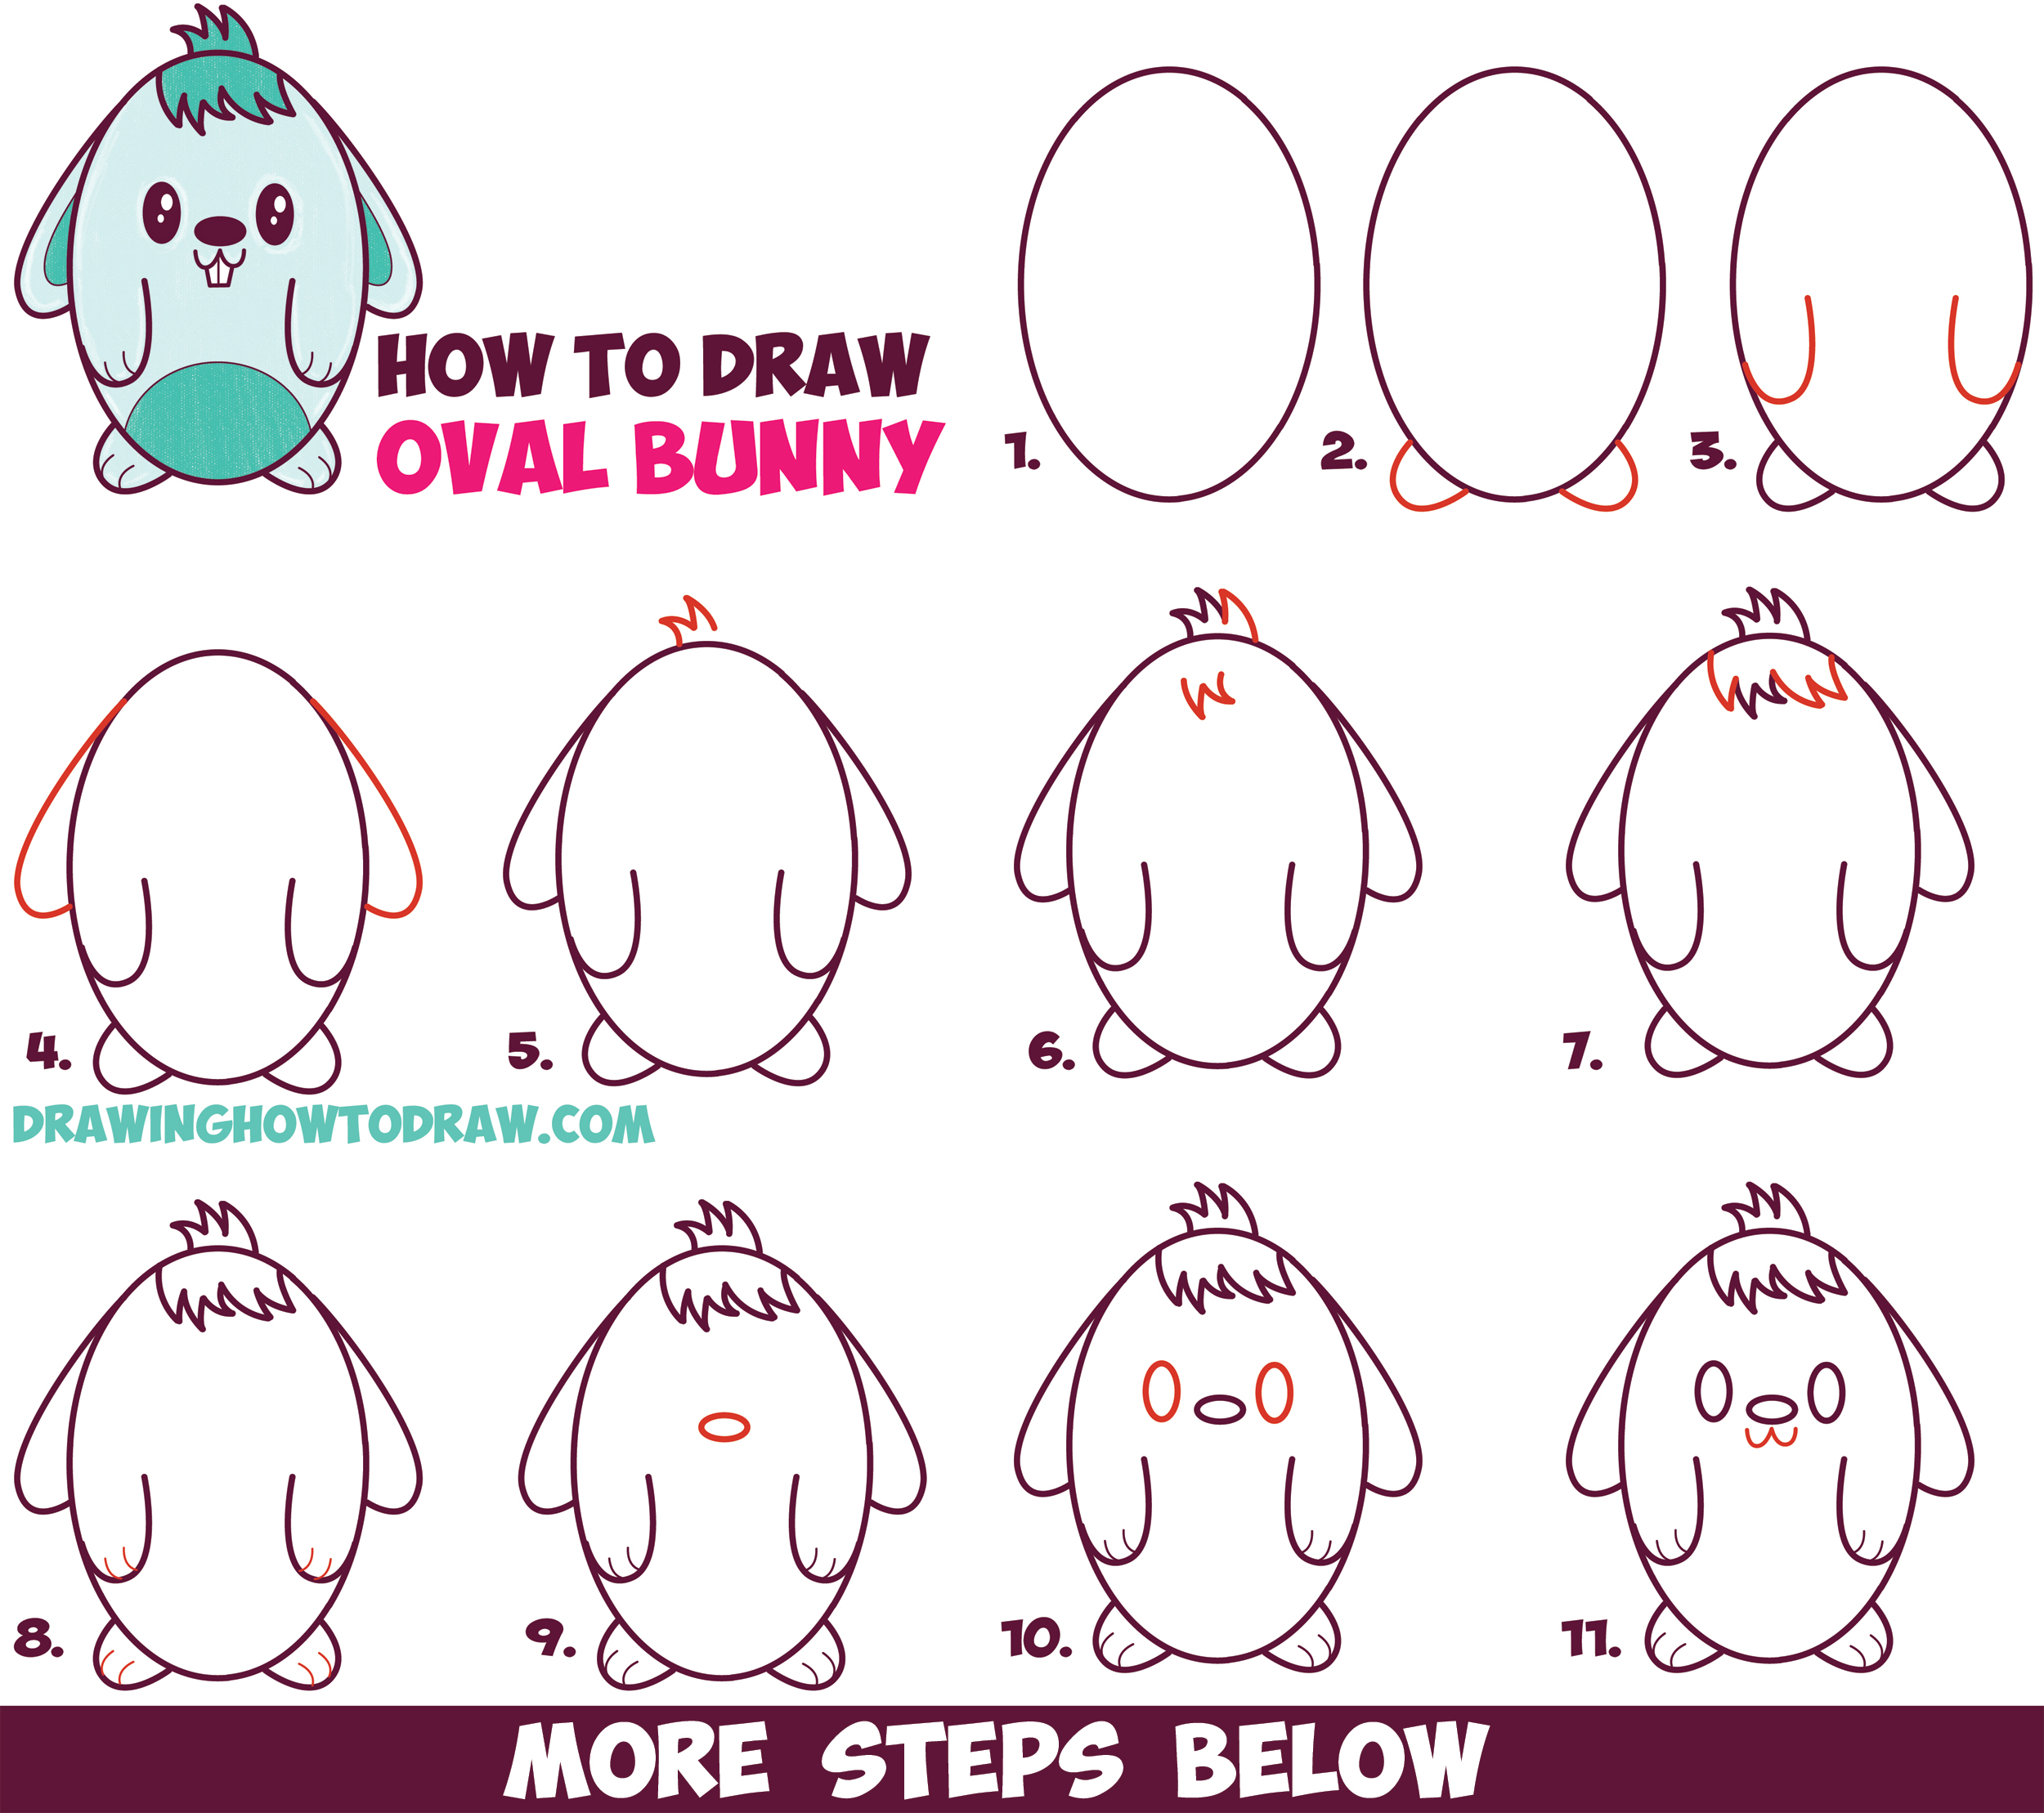 How to Draw a Cute Cartoon Bunny Rabbit from an Oval – Easy Step by ...